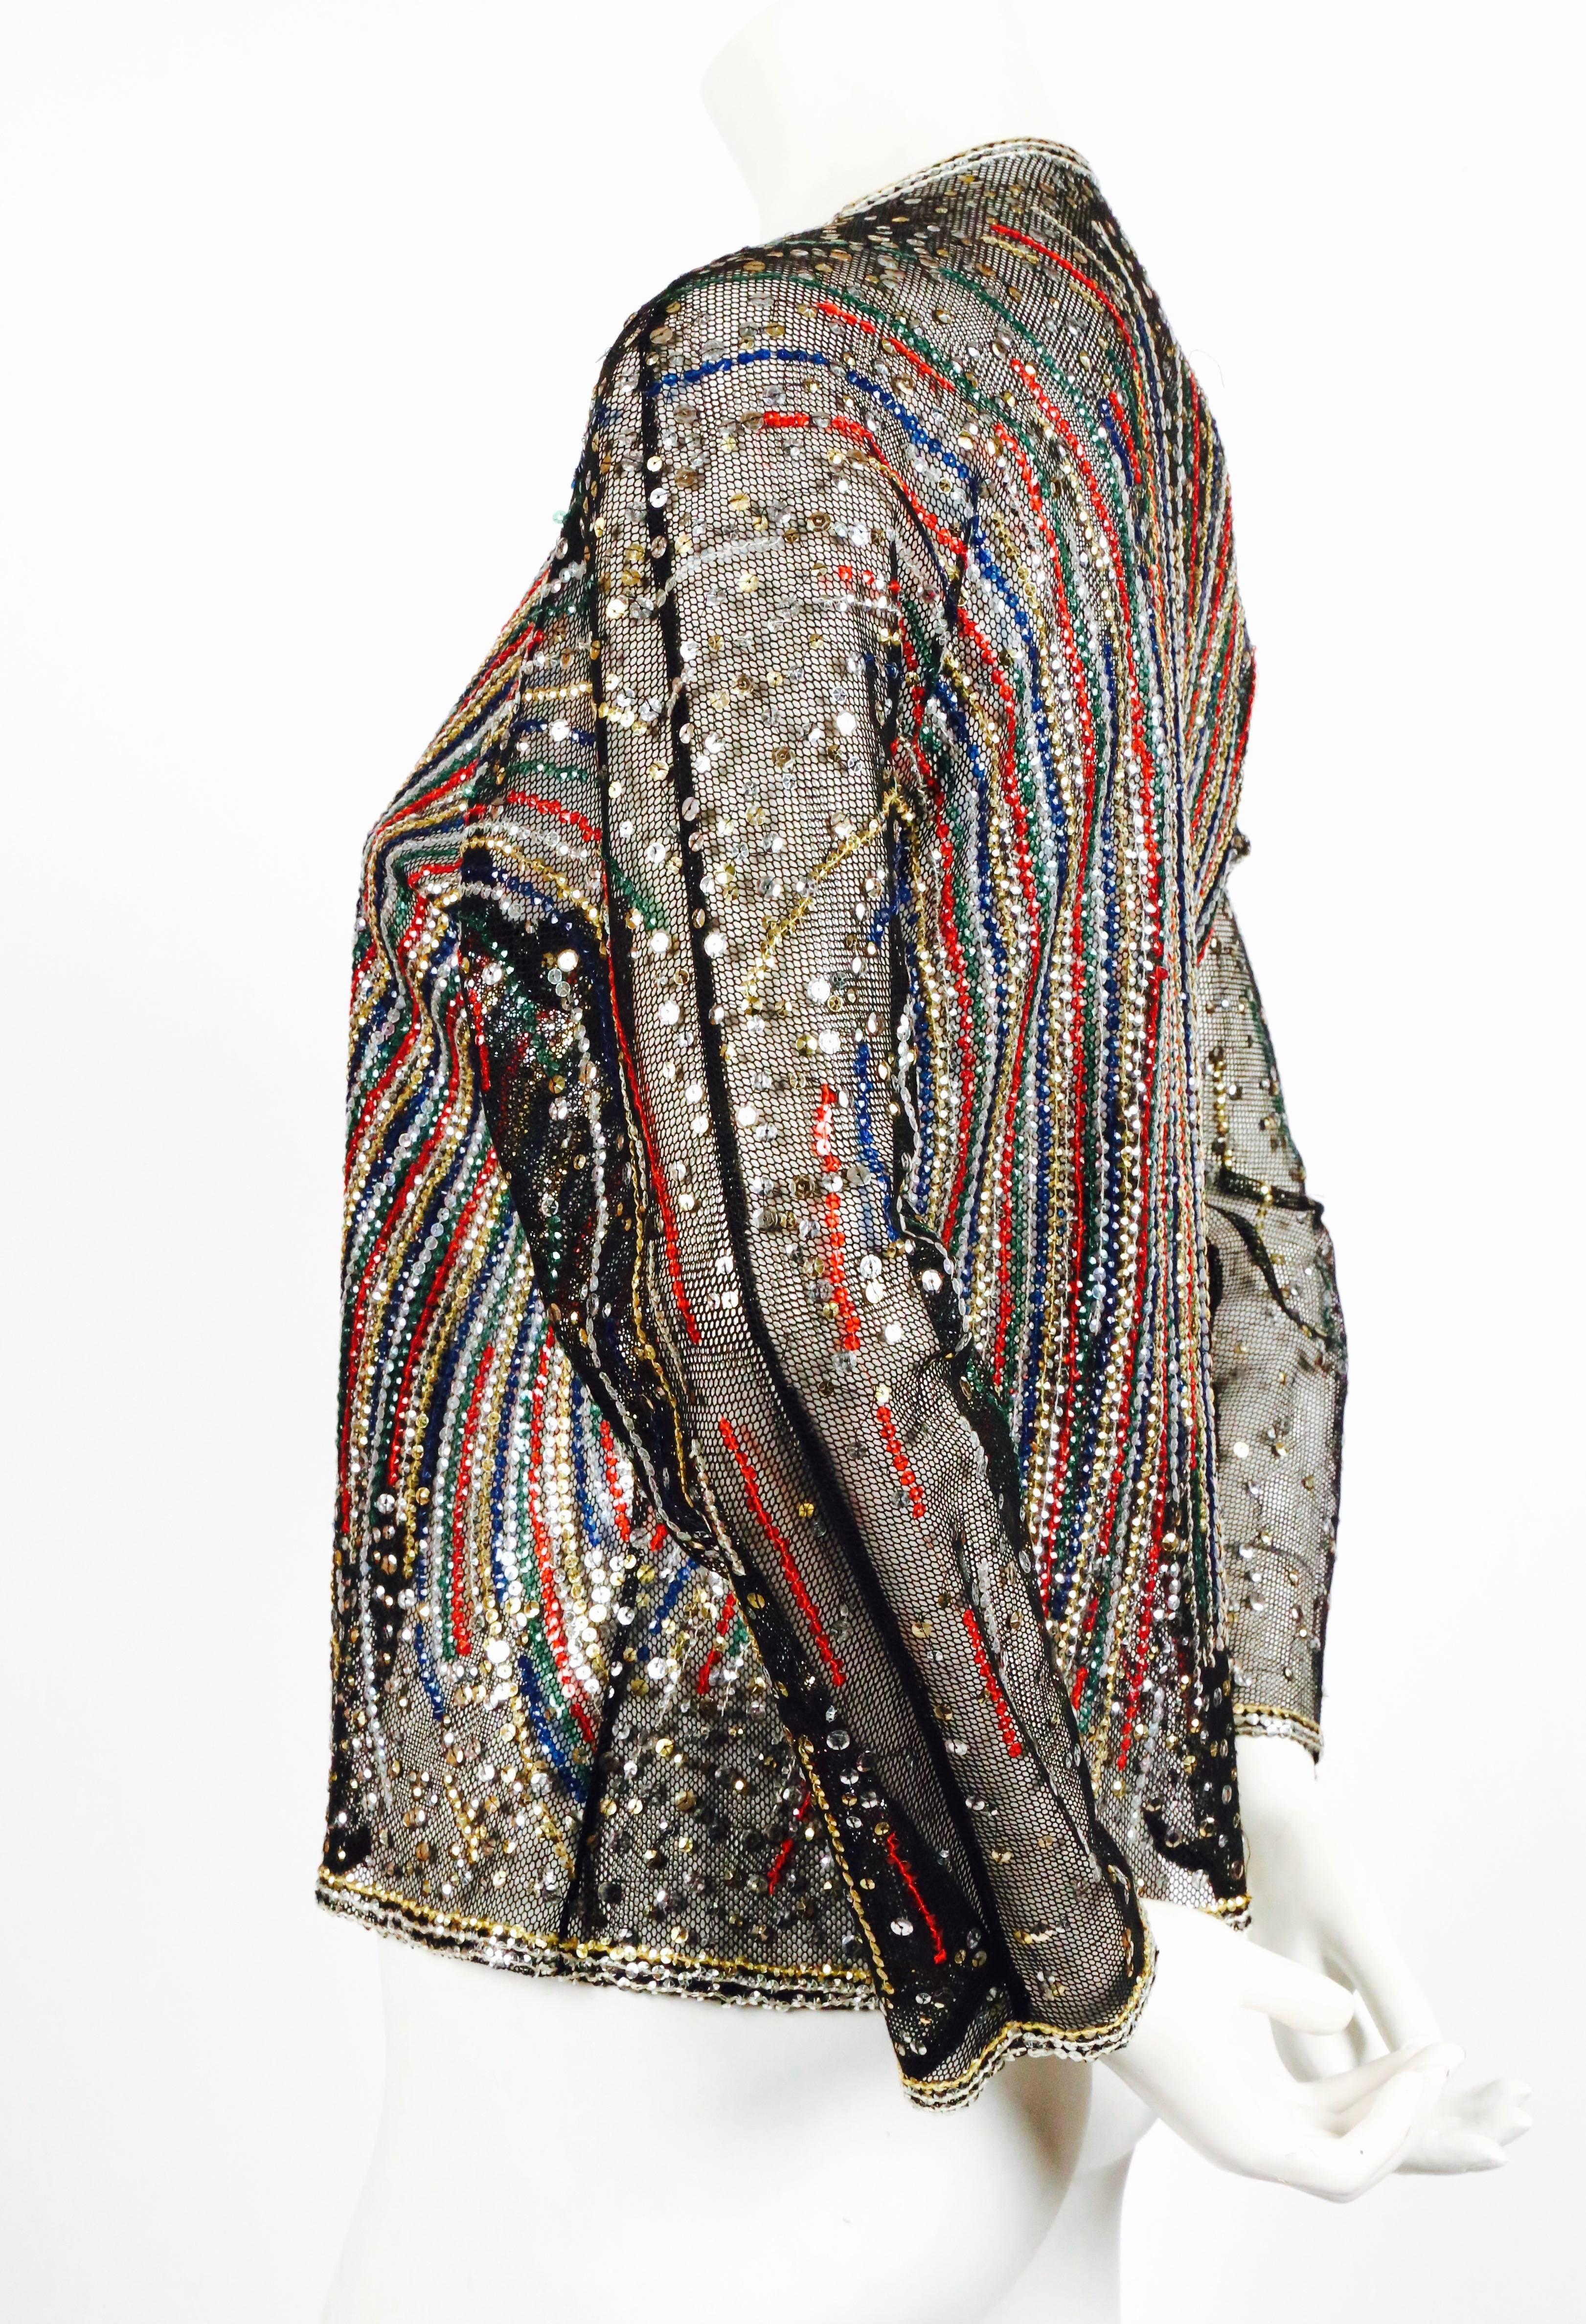 Spectacular jacket made of black tulle artfully decorated with varying sizes of sequins from Halston dating to the 1970's. Sequin colors are gold, silver, ruby red, sapphire blue, emerald green, and iridescent white. Very flexible in sizing due to